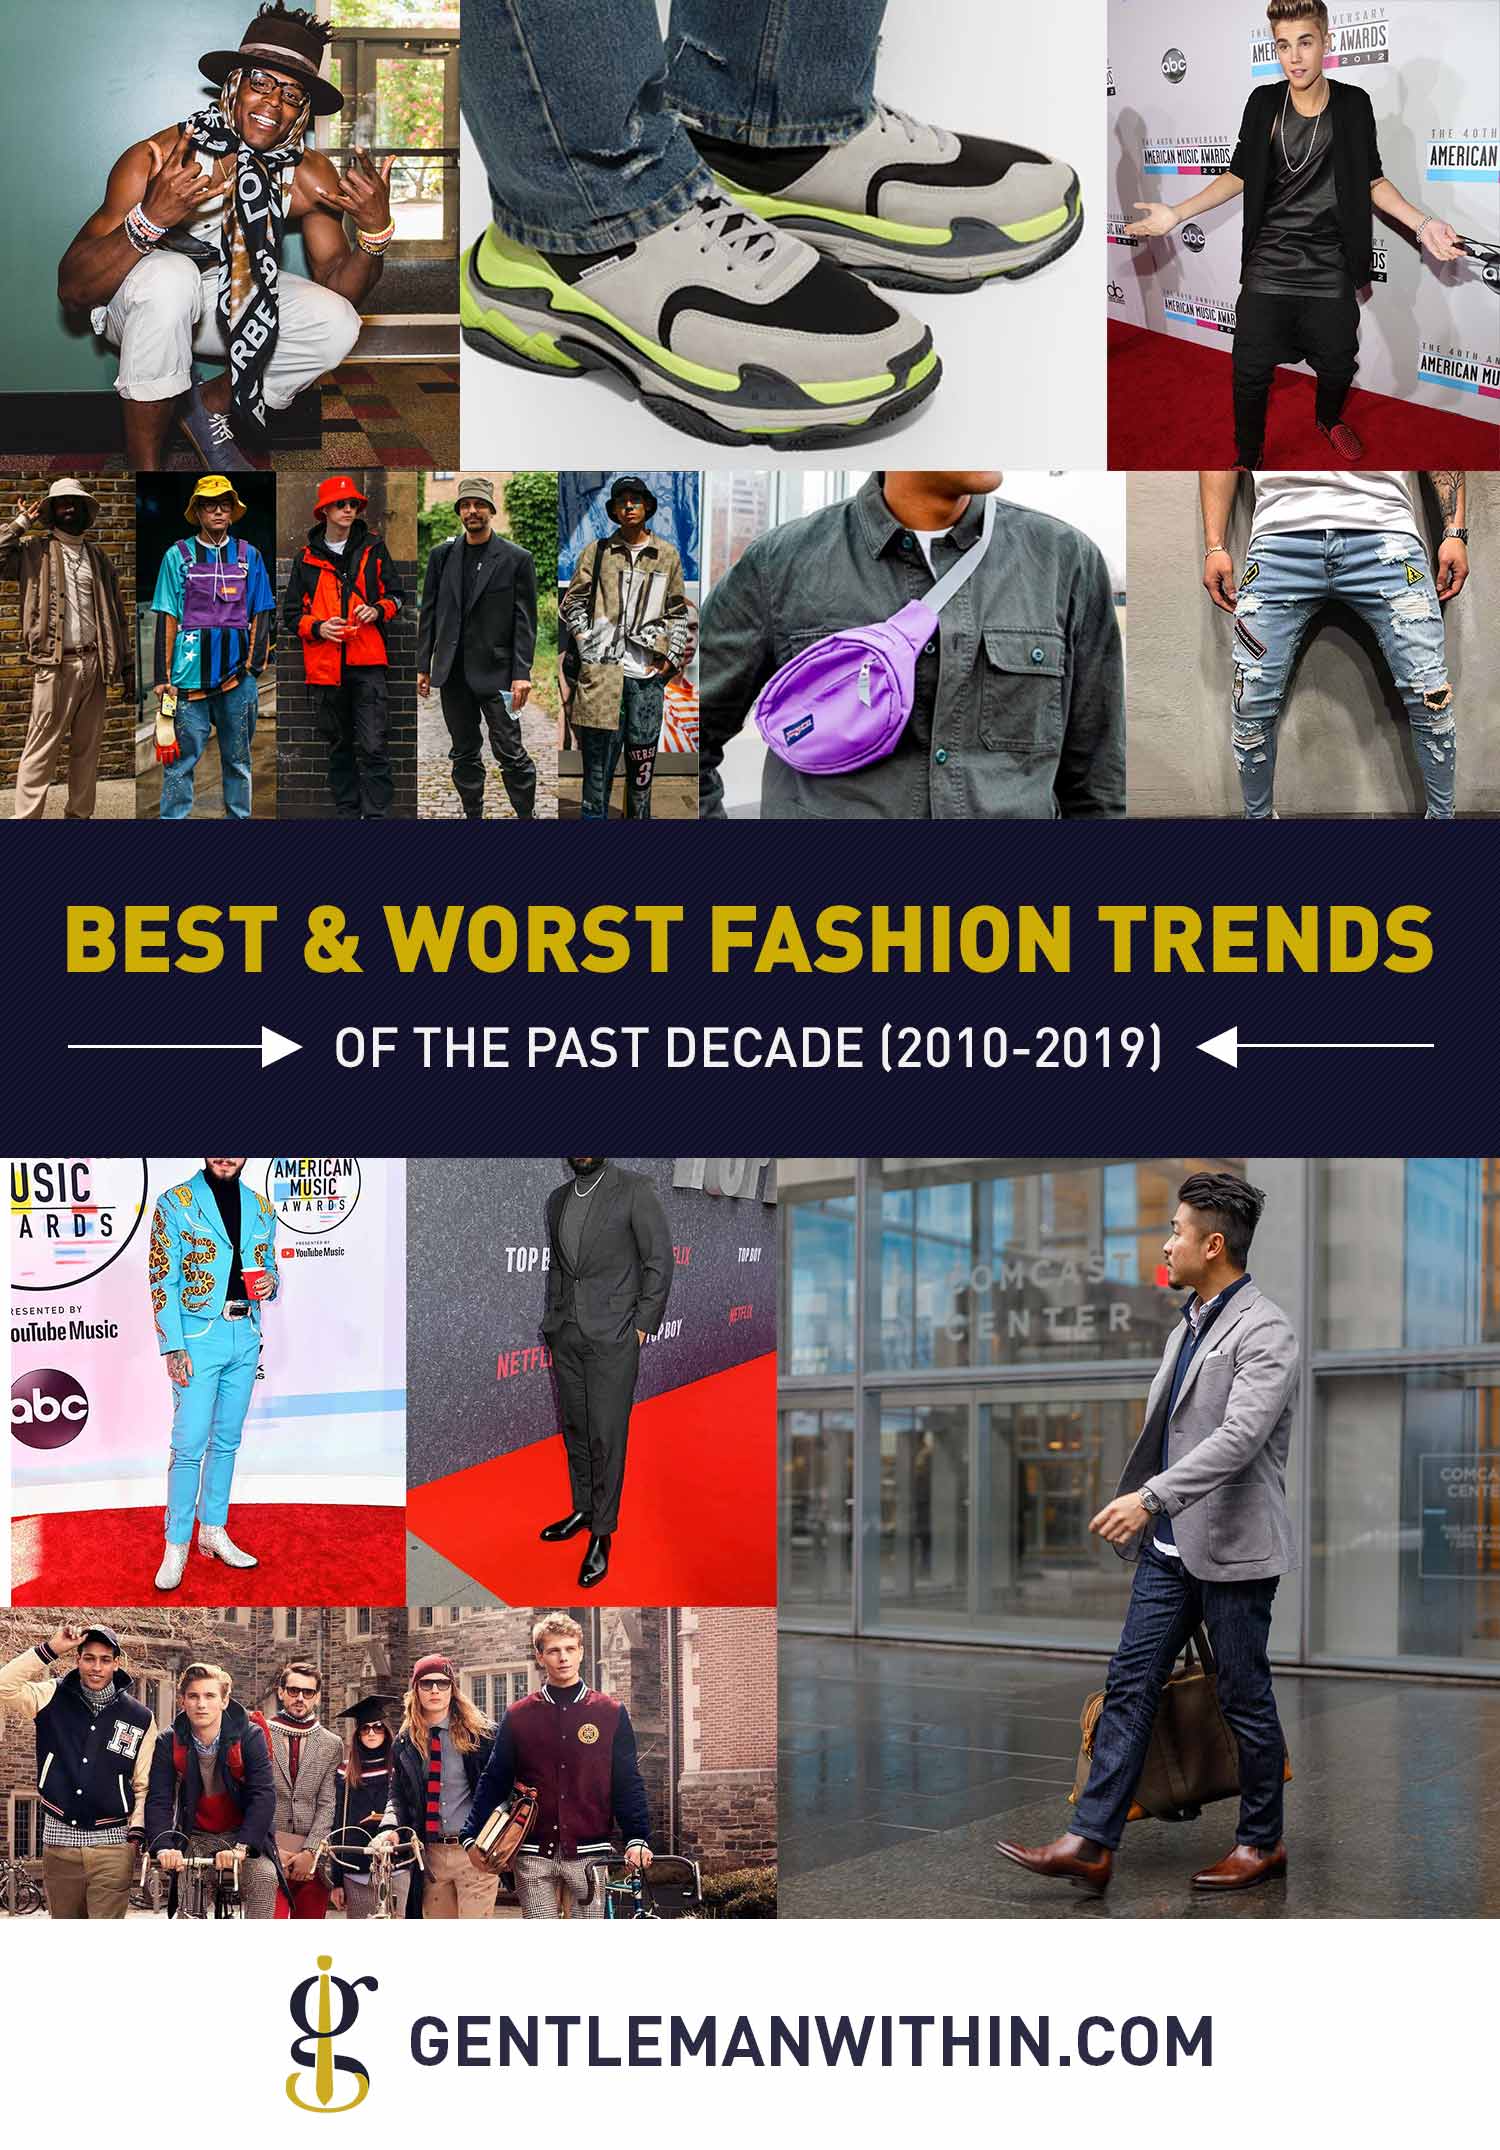 Best and Worst Fashion Trends from the Past Decade | GENTLEMAN WITHIN